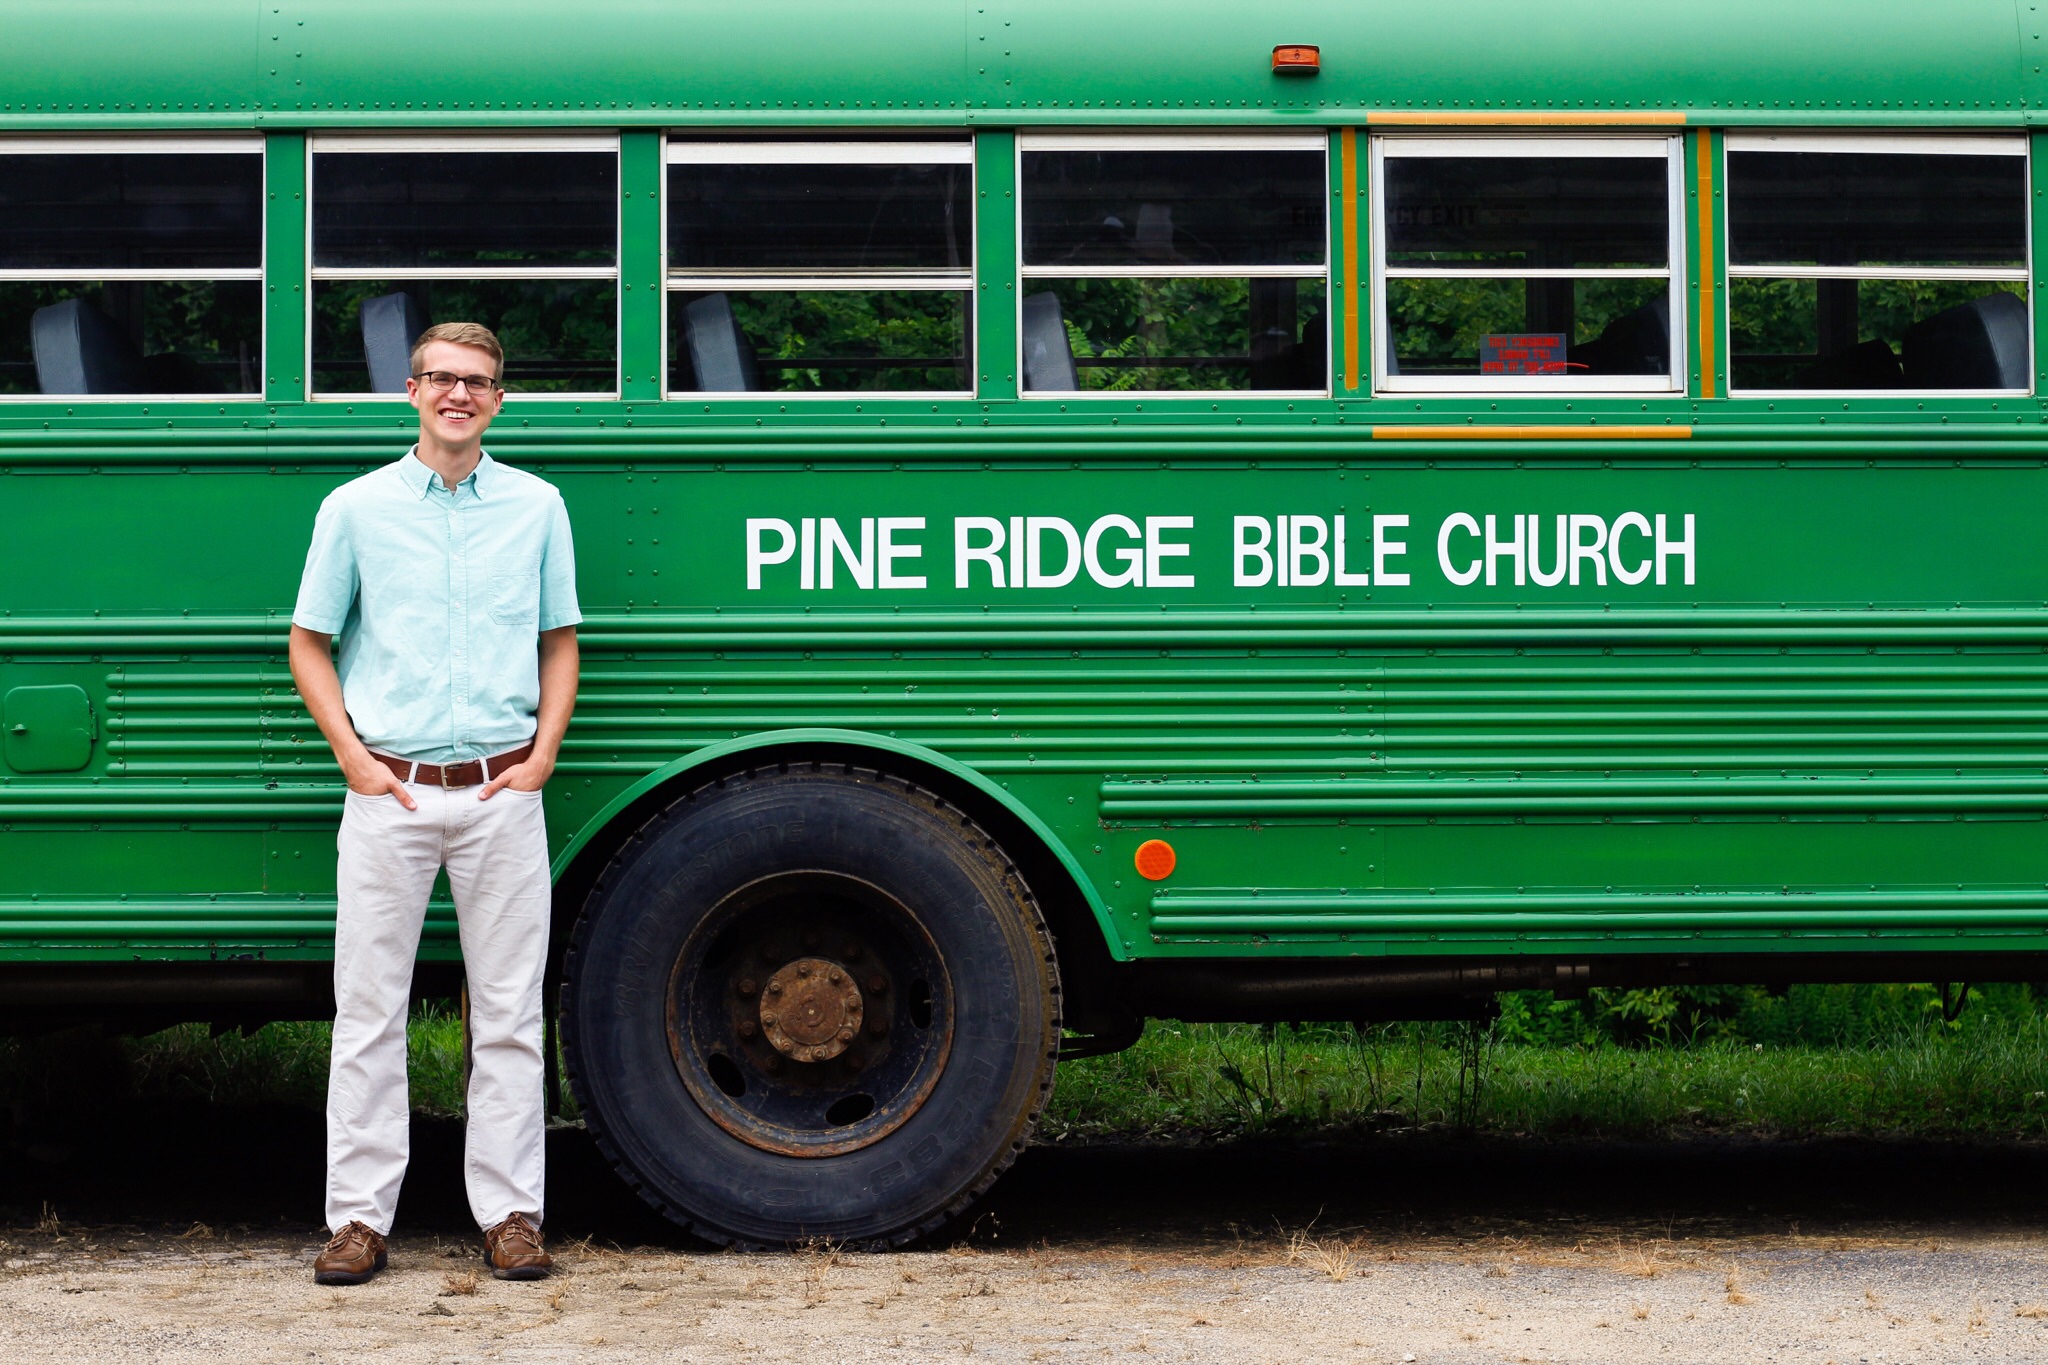 Ride on the Bible Bus